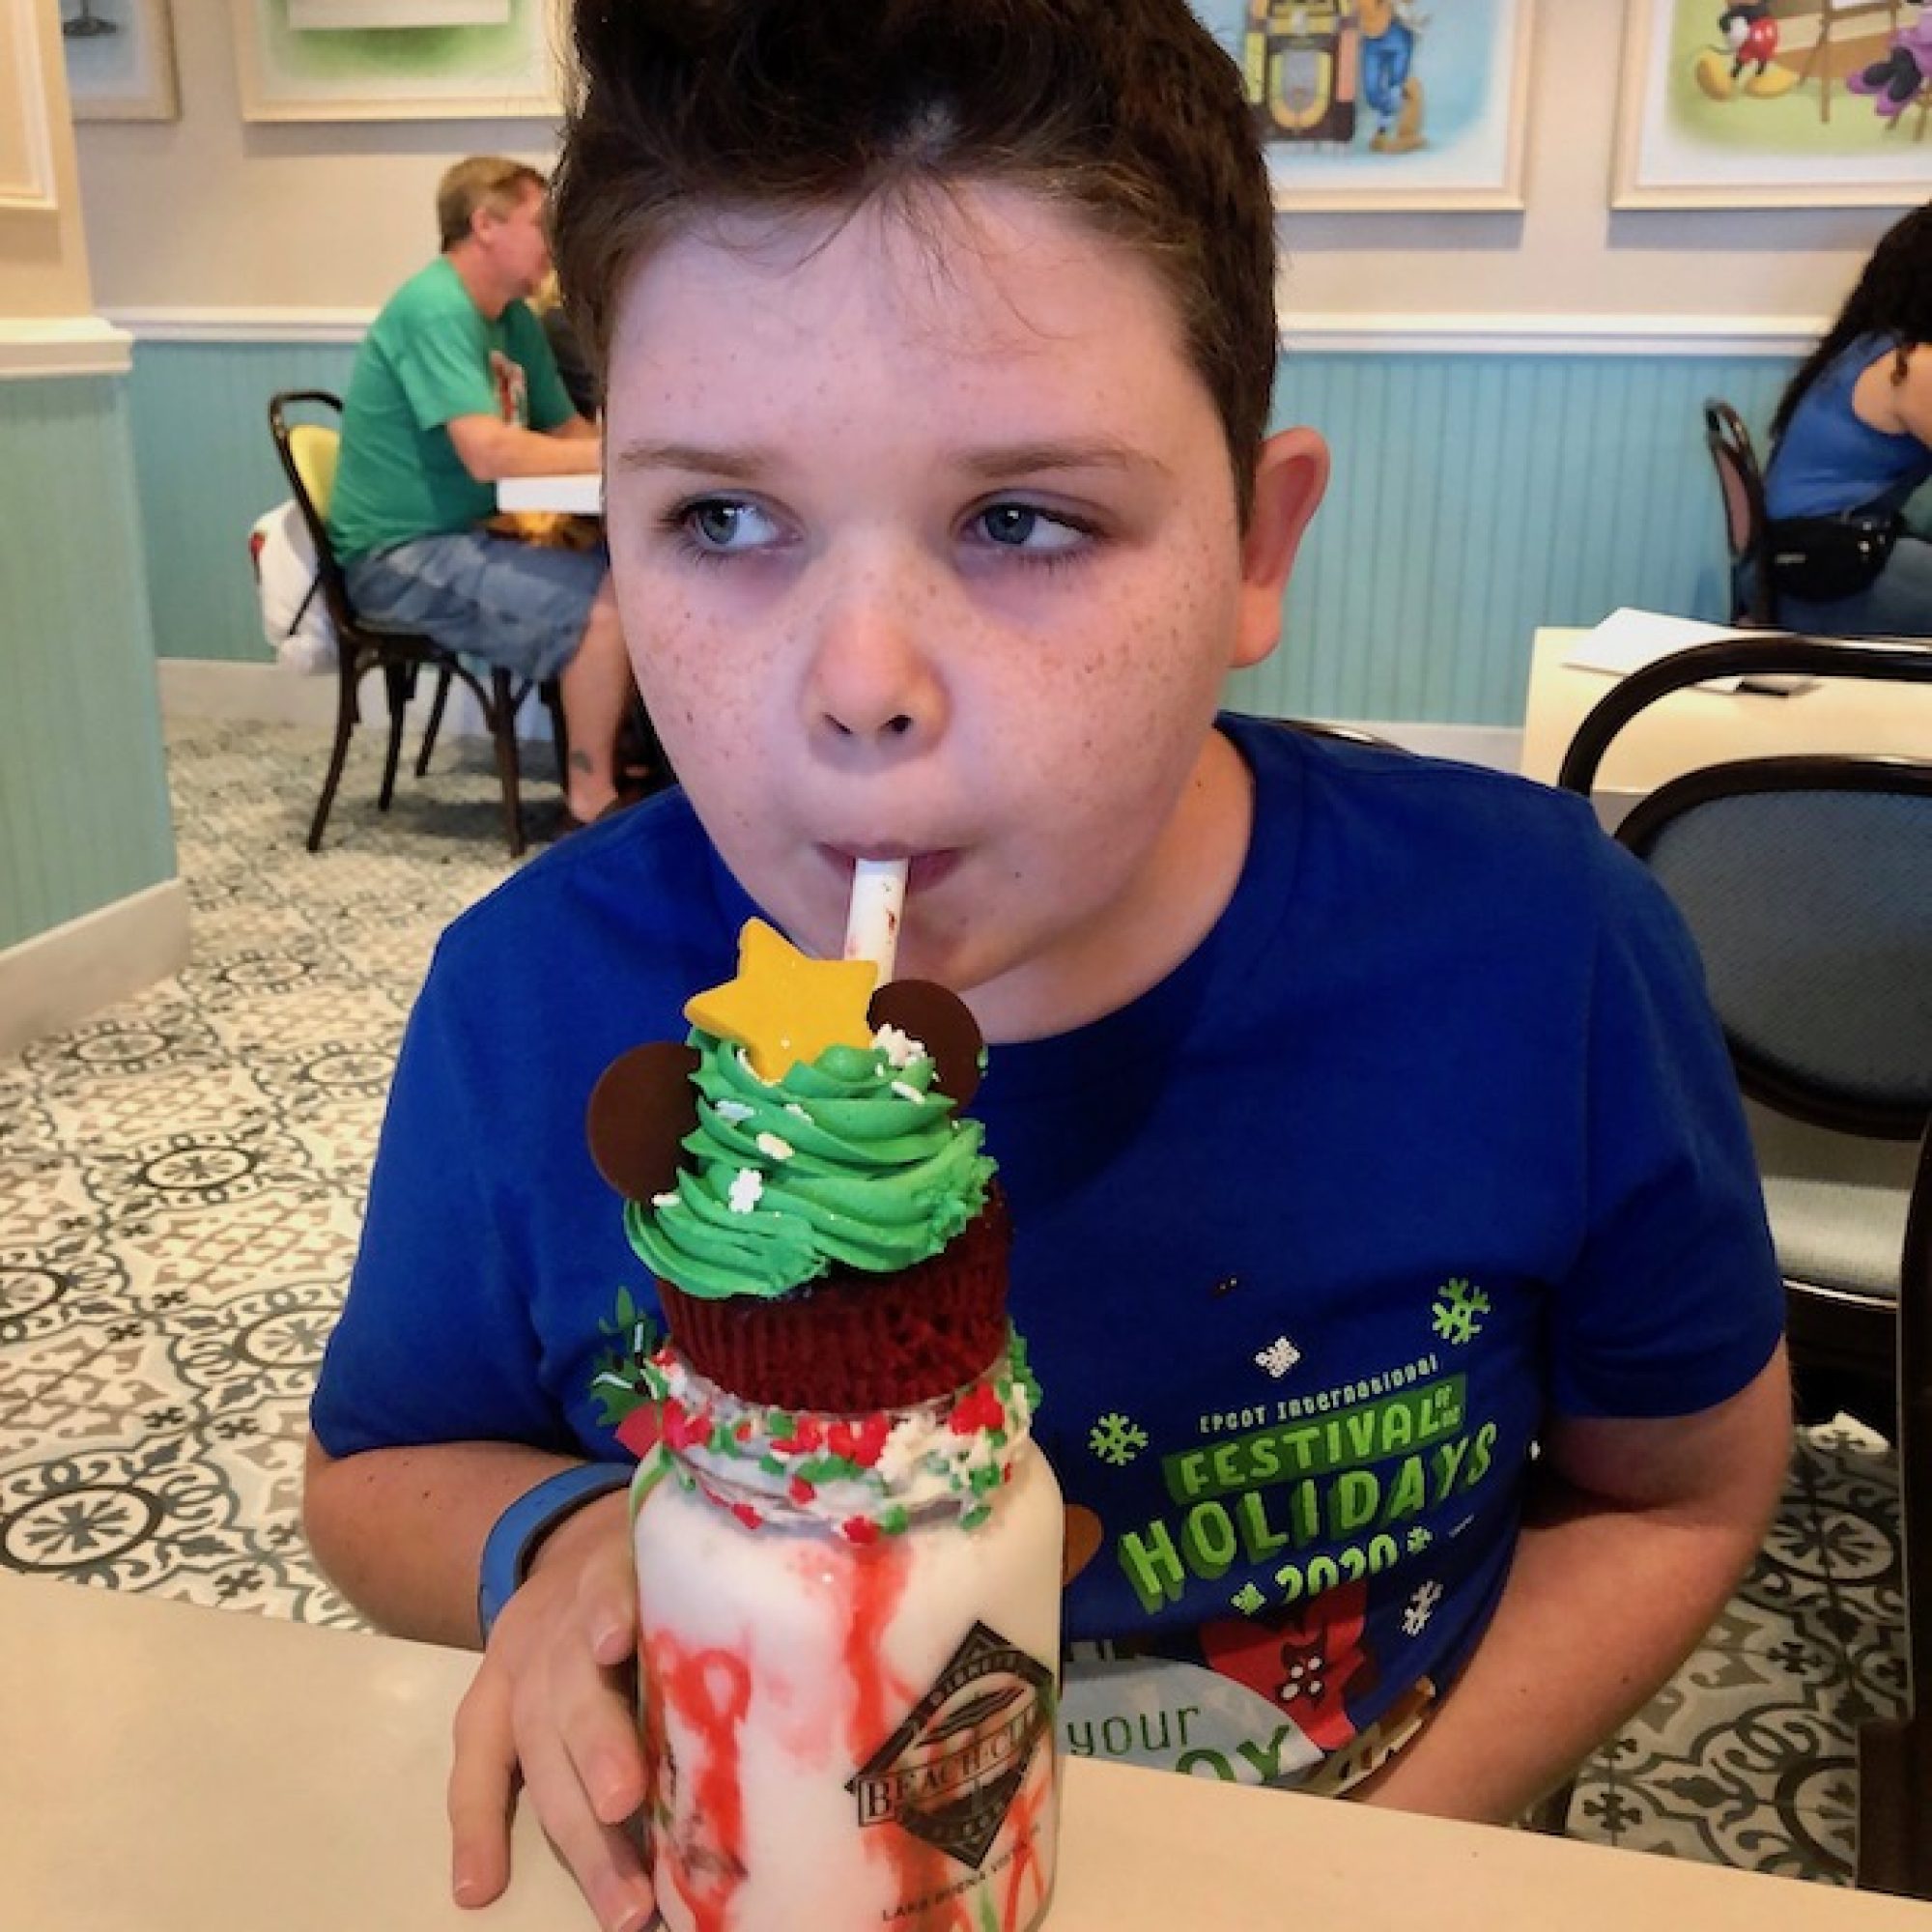 We couldn't wait to try out Beaches and Cream's Holiday Milkshake!